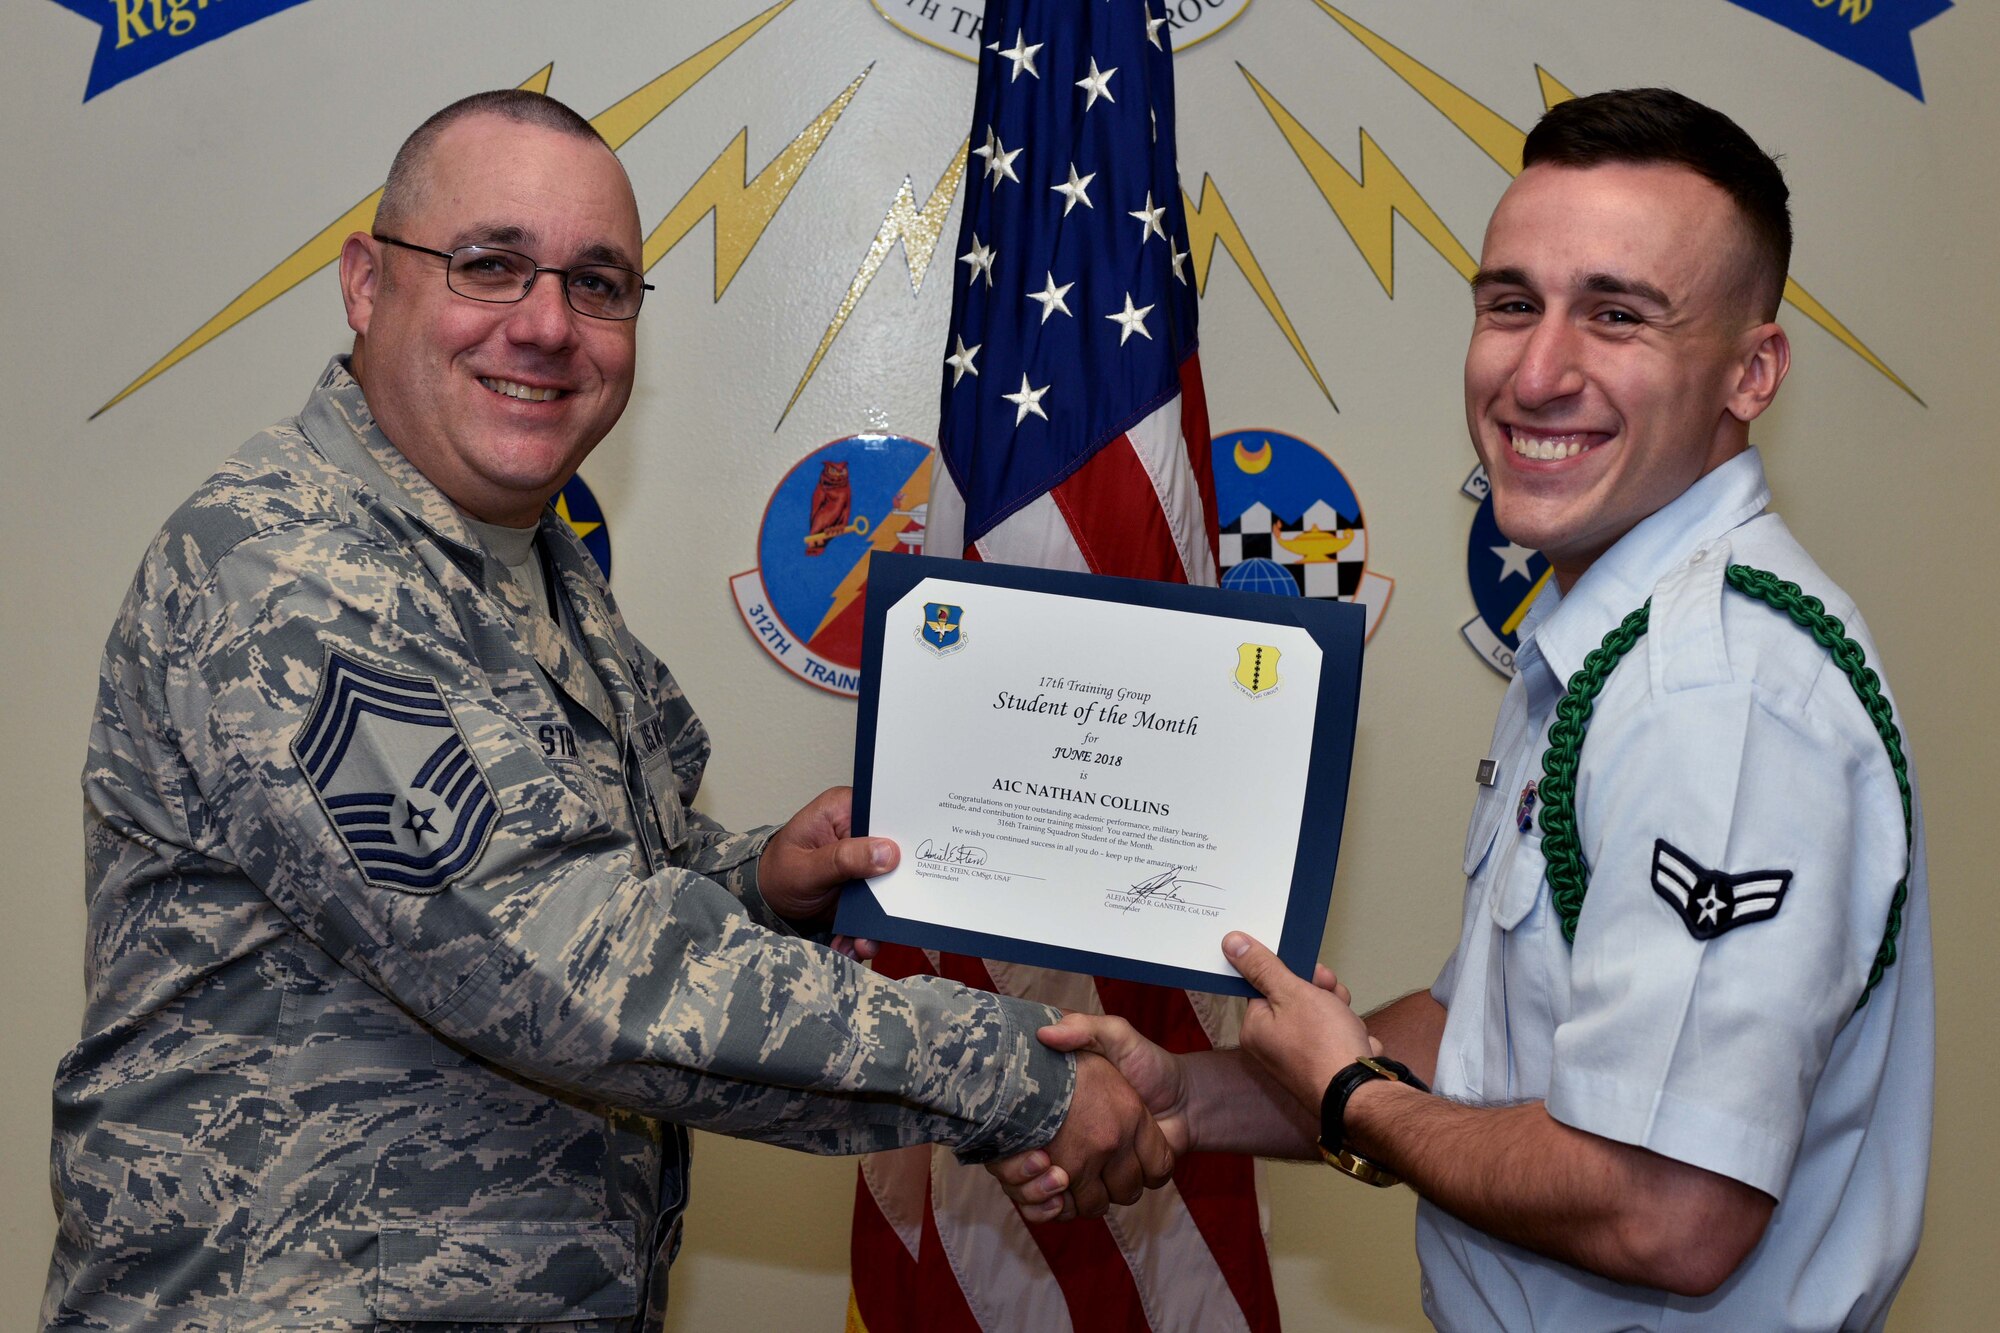 U.S. Air Force Chief Master Sgt. Daniel Stein, 17th Training Group superintendent, presents the 316th Training Squadron Student of the Month award to Airman 1st Class Nathan Collin, 316th TRS trainee, at Brandenburg Hall on Goodfellow Air Force Base, Texas, July 6, 2018. The 316th TRS’s mission is to conduct U.S. Air Force, U.S. Army, U.S. Marine Corps, U.S. Navy and U.S. Coast Guard cryptologic, human intelligence and military training. (U.S. Air Force photo by Senior Airman Randall Moose/Released)